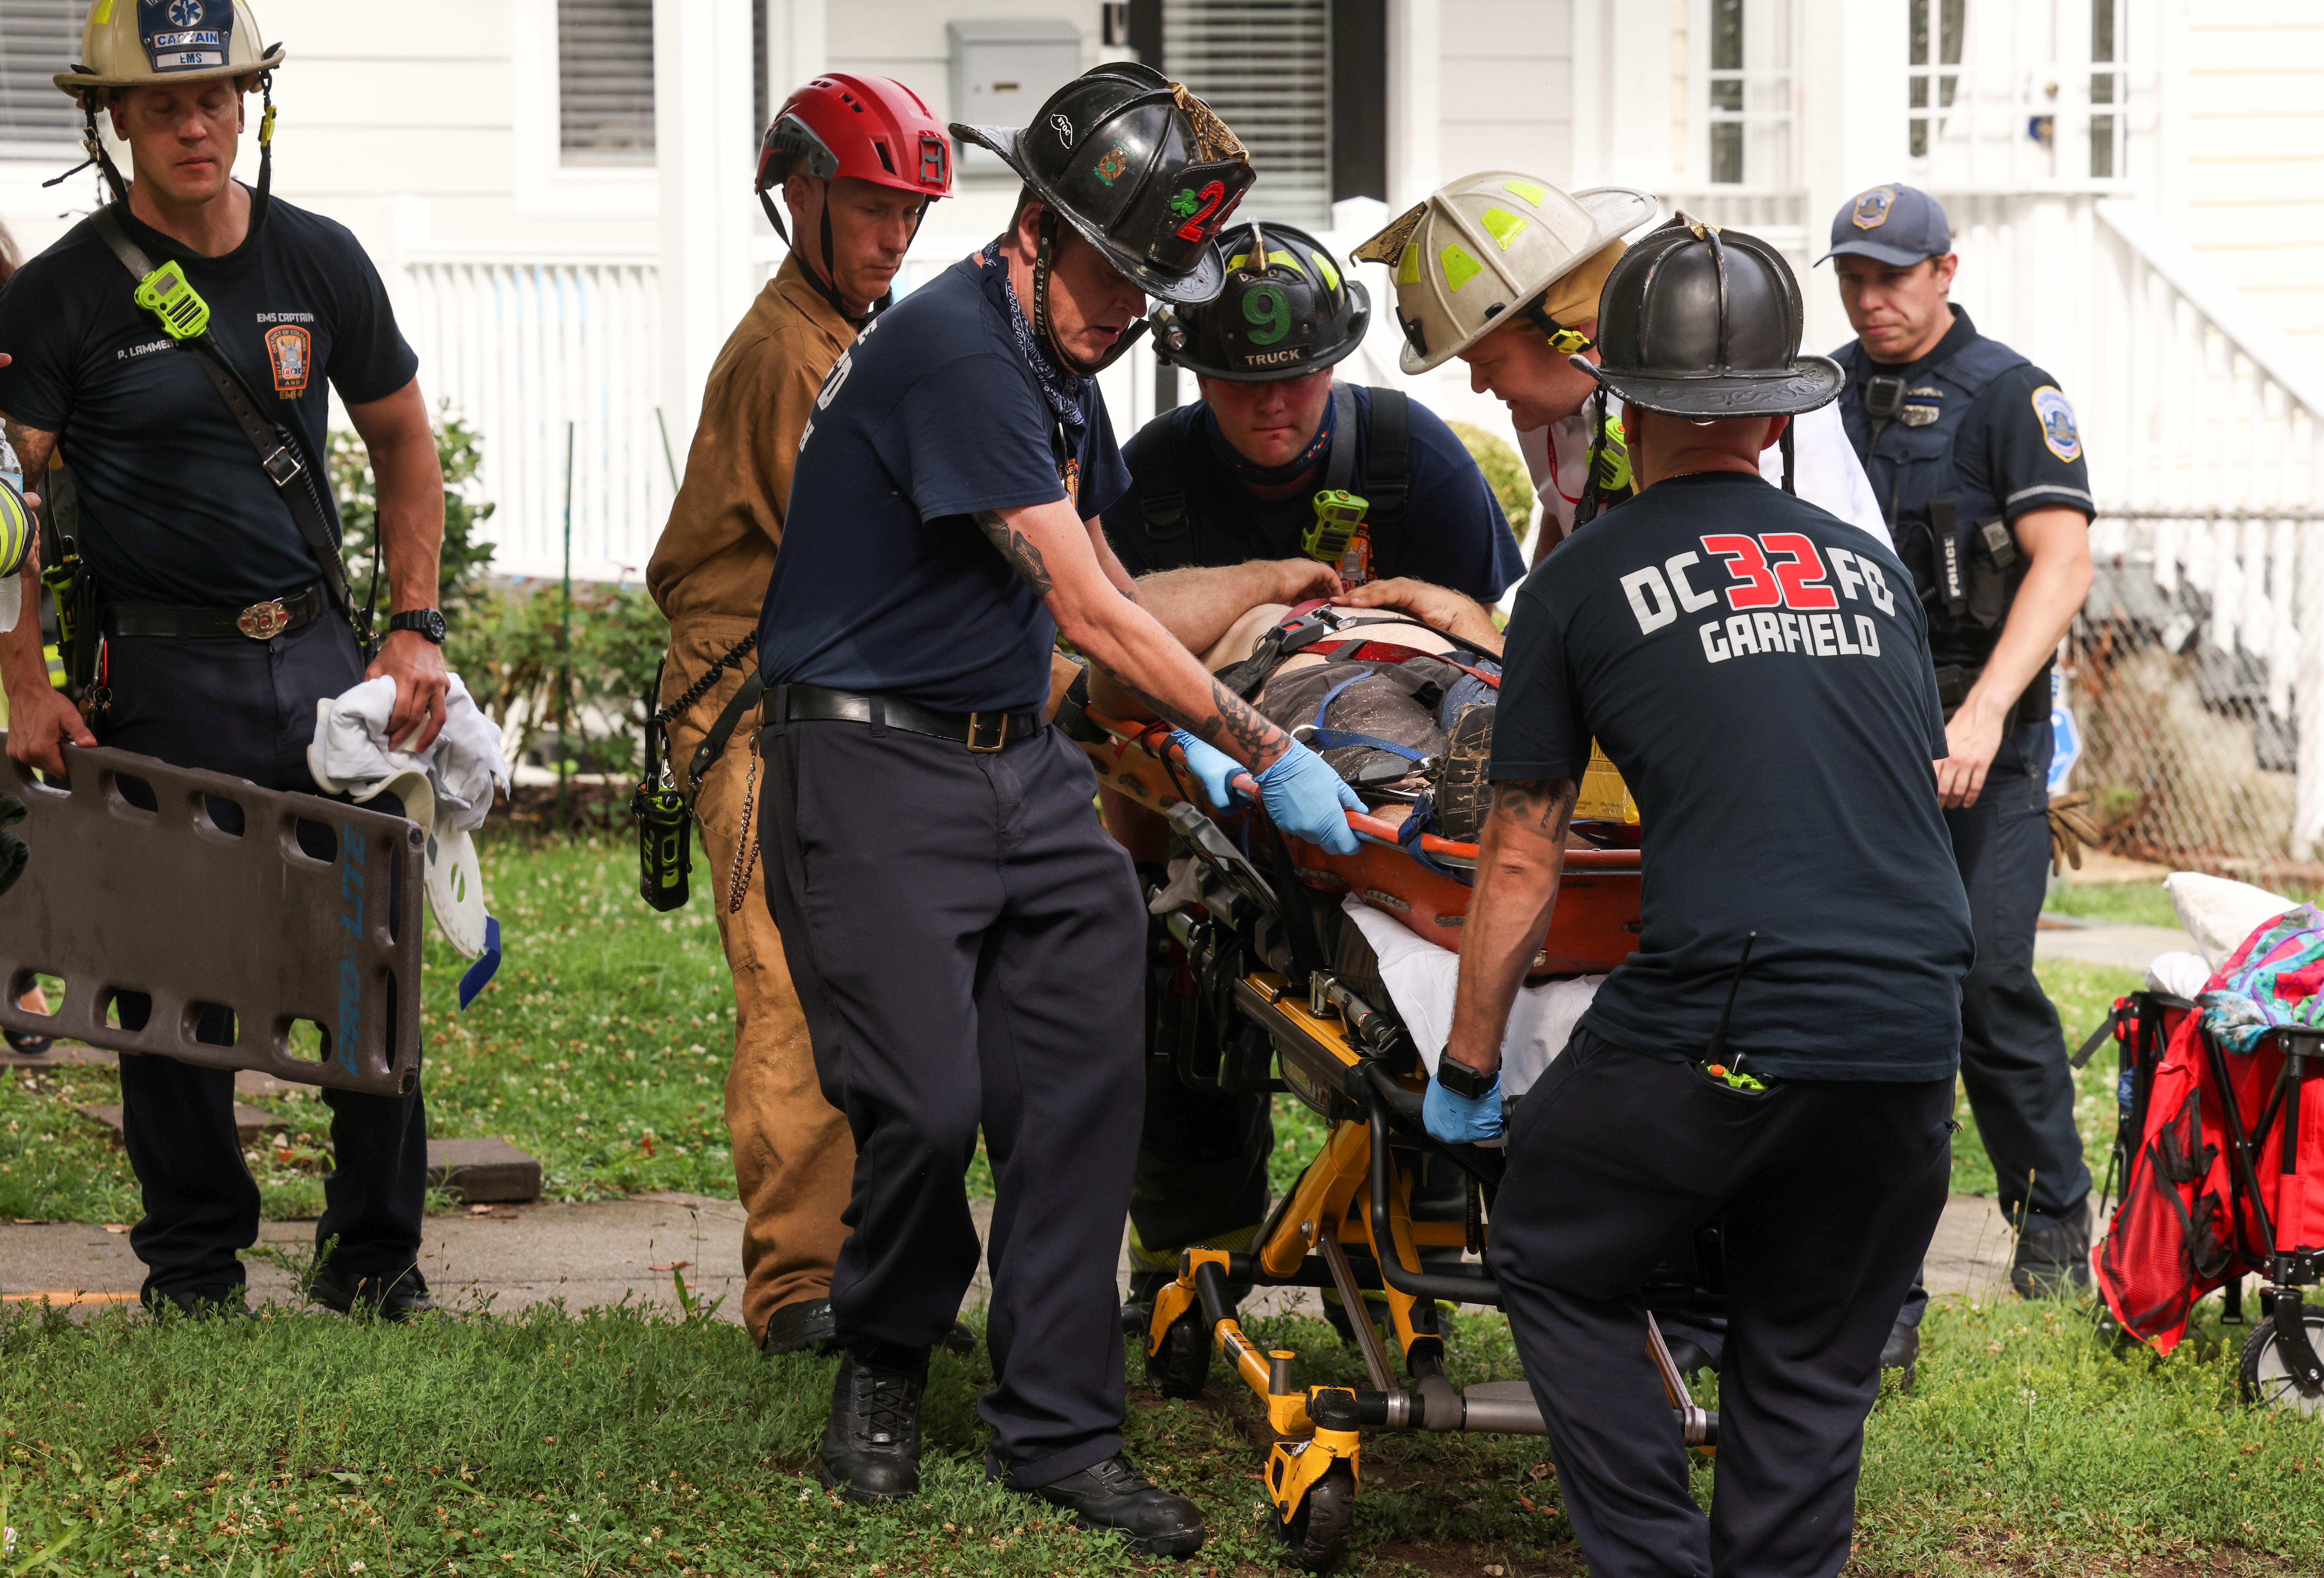 Emergency personnel place an injured construction worker into an ambulance for transport to the hospital after he was extricated from the debris after a building undergoing construction collapsed on Kennedy Street in Washington, U.S., July 1, 2021. REUTERS/Evelyn Hockstein